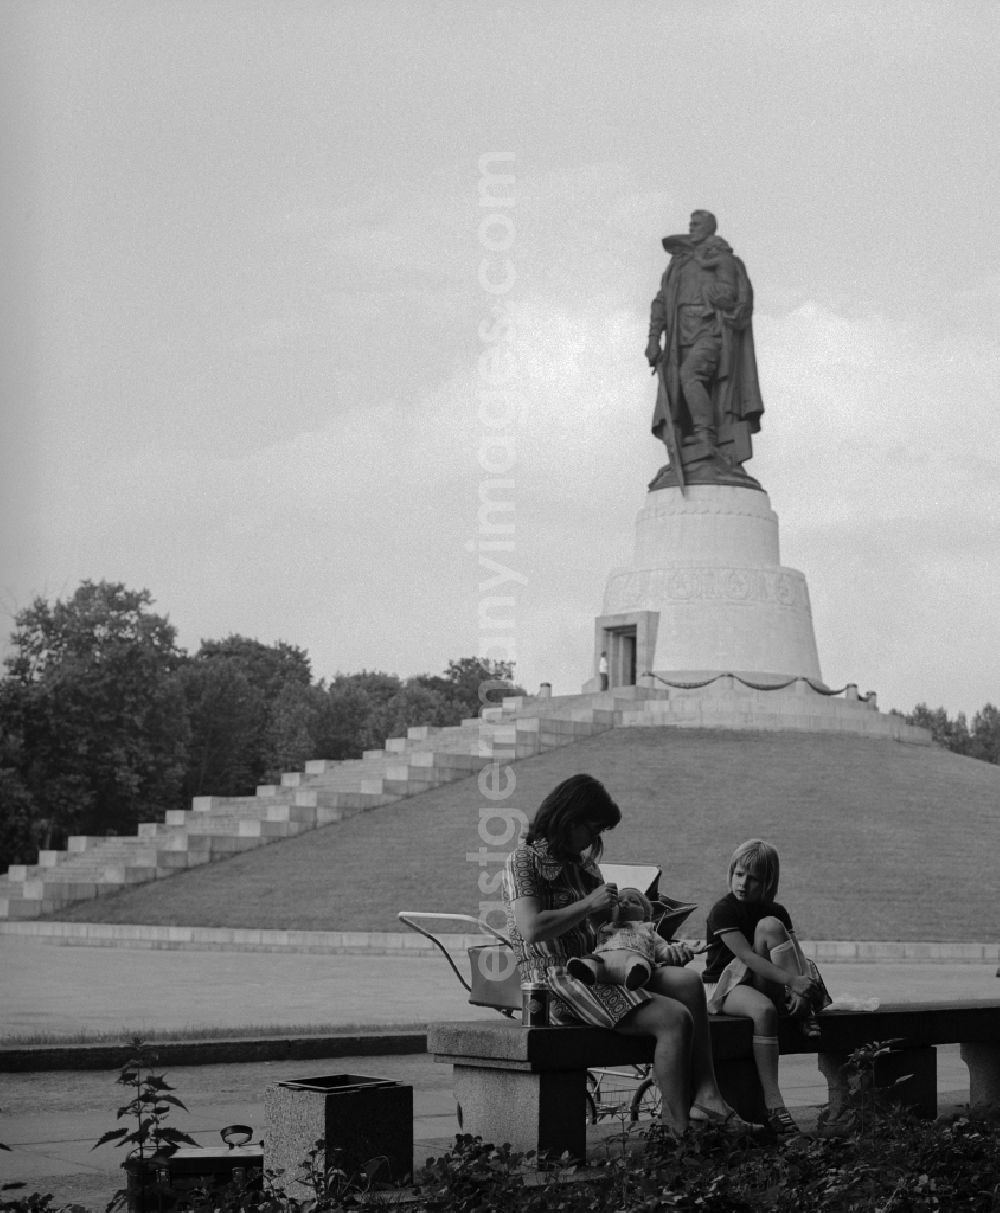 GDR picture archive: Berlin - Treptow - Mother walking with baby carriage in the memorial walk Soviet War Memorial in Treptower Park. In the background the stature and Child with broken swastika. The plant was built in honor of the Soviet soldiers killed in World War 2